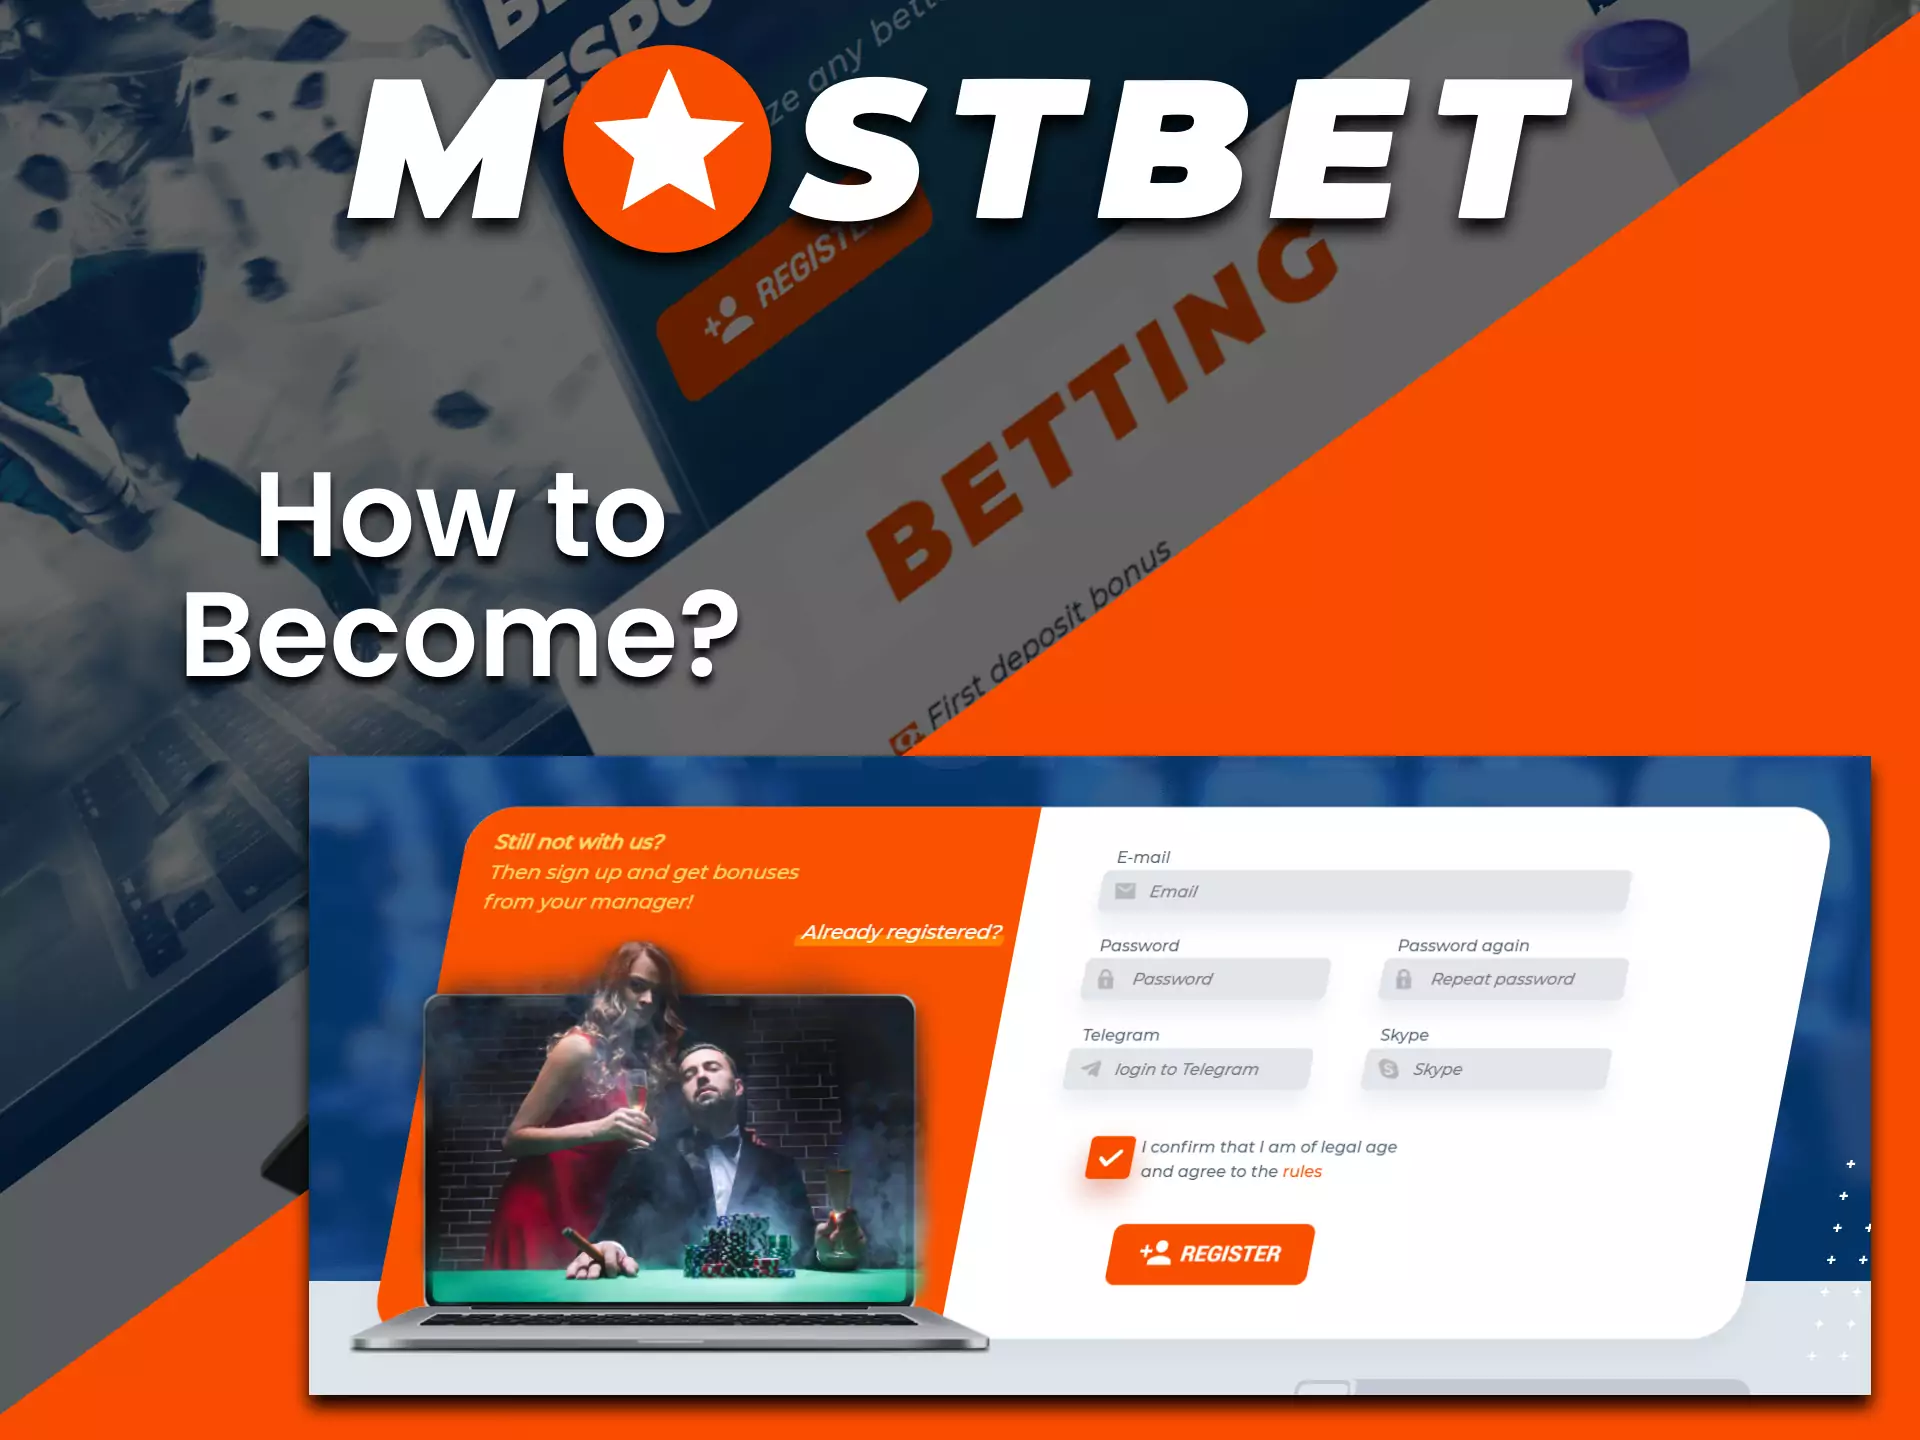 You can join the affiliate program by Mostbet in your personal account.